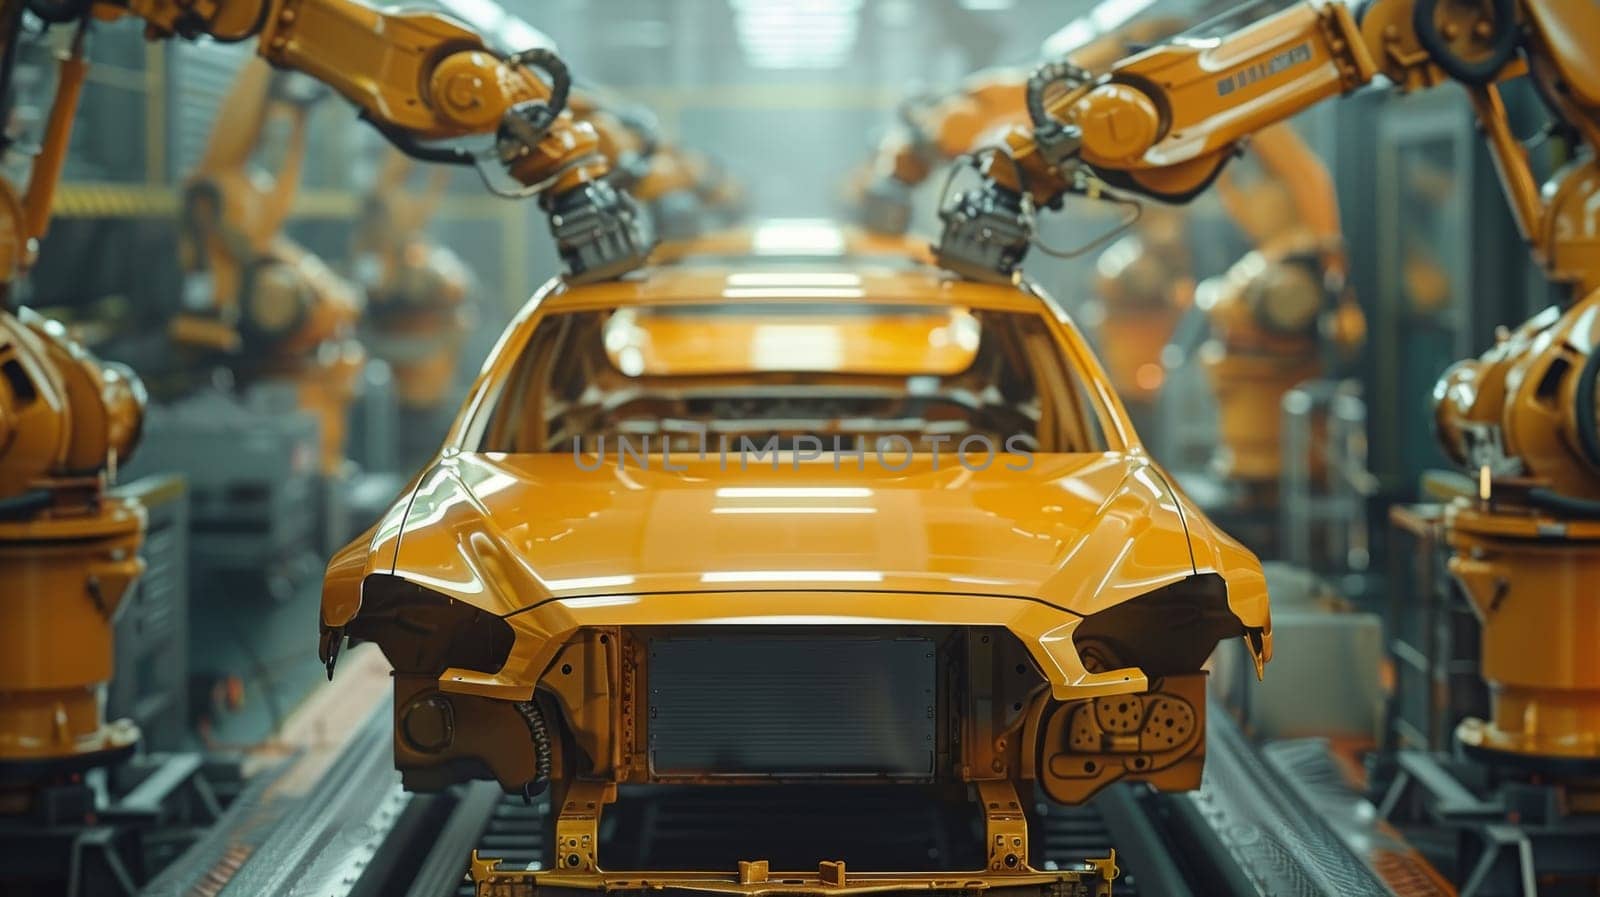 A car is being built in a factory with many robots working on it by itchaznong